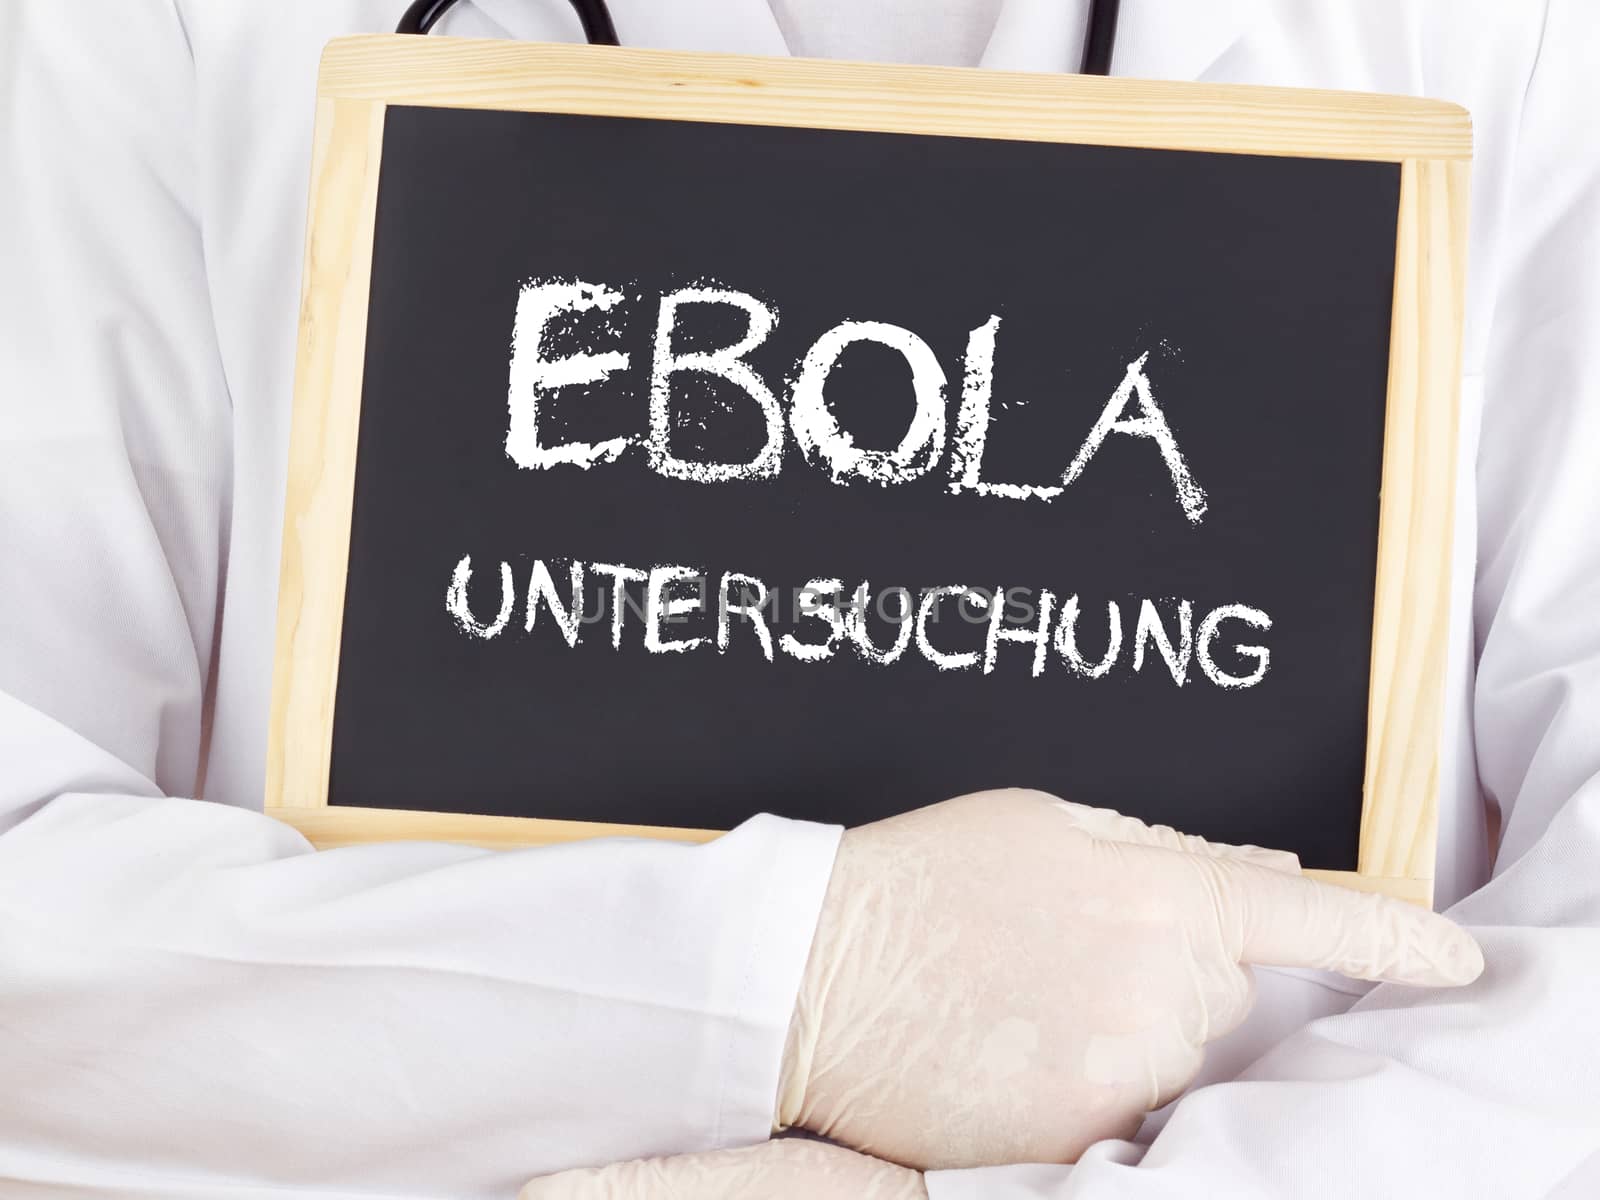 Doctor shows information: Ebola examination in german by gwolters